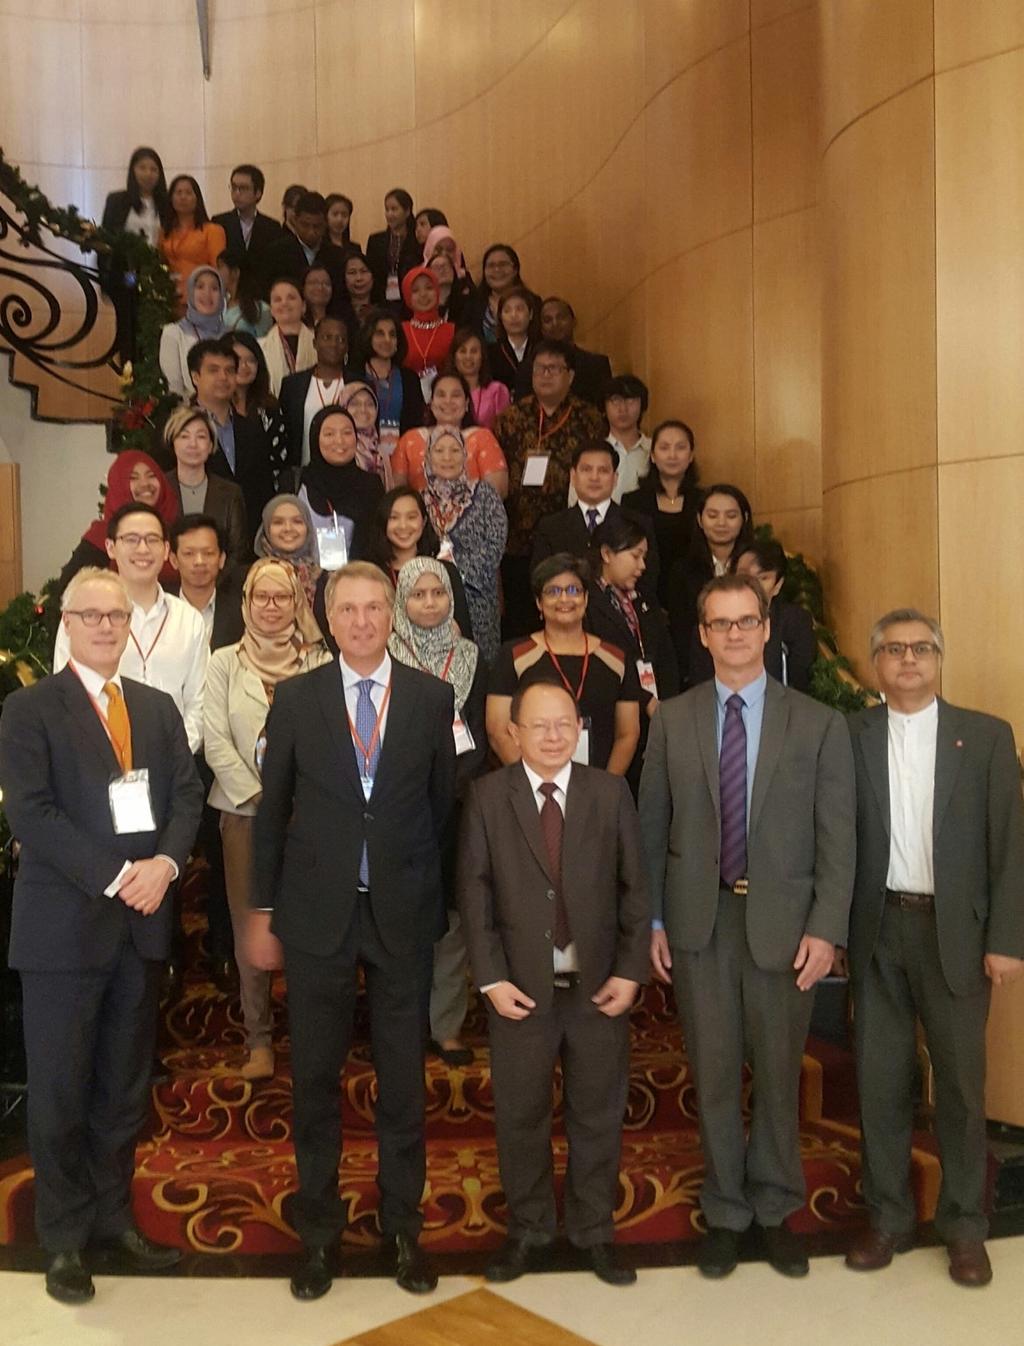 Blue Book 2017 19 Developing disability inclusiveness With support from the Netherlands, the ASEAN Secretariat organised its fourth human rights training course in Jakarta, Indonesia in December 2016.